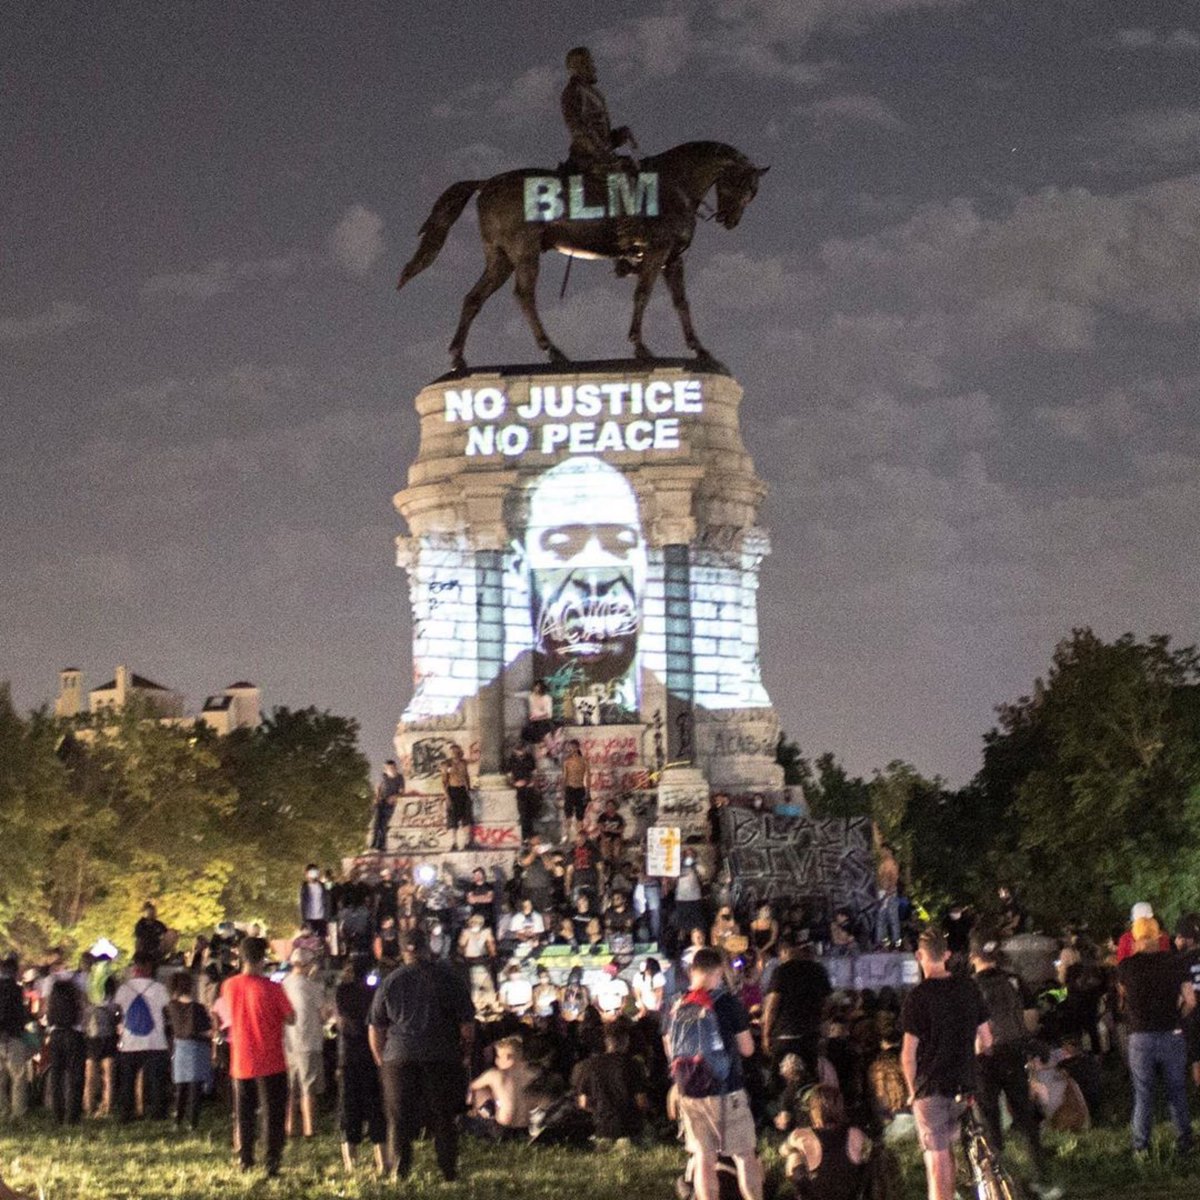 this is beautiful; Robert E. Lee's monument last night. fuck these racist fucks & tear every one of their monuments to the ground. #VirginiaIsForLovers #FuckRacism ✊ #GeorgeFloyd #BlackLivesMatter 
#PoliceMurder #PoliceBrutality #ExcessiveForce #ThisIsAmerica #ICantBreathe 🏳️